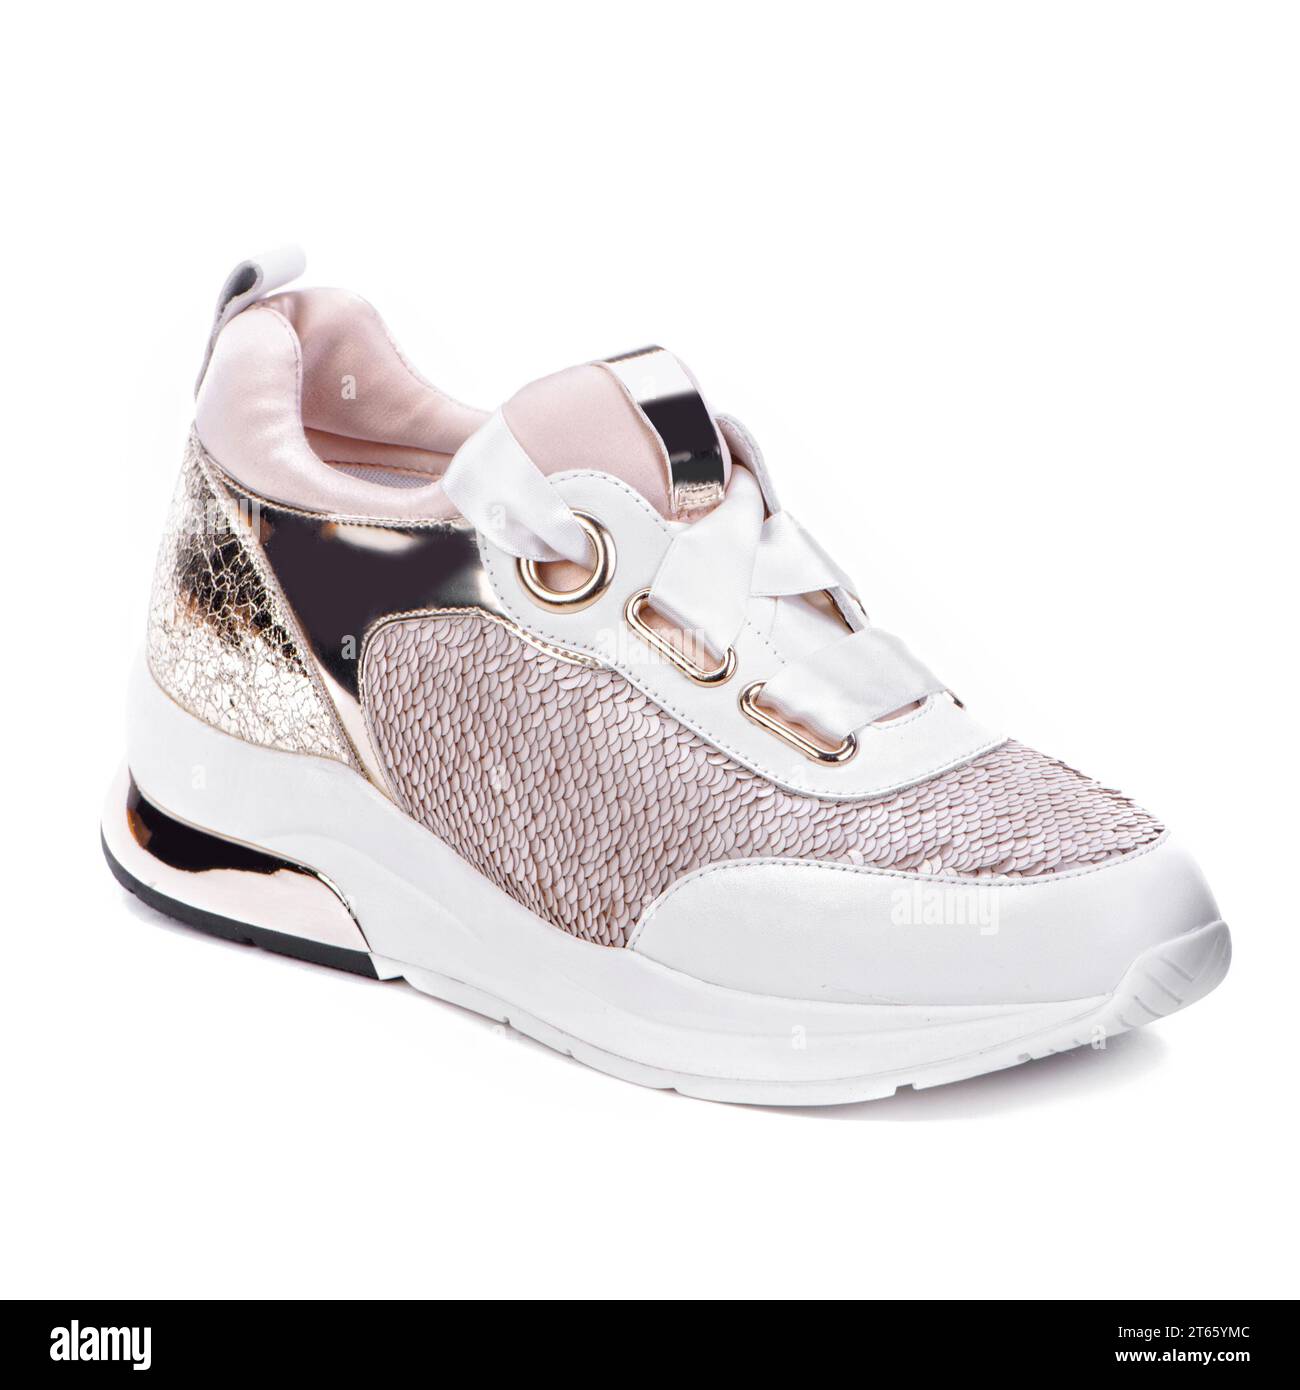 Fashionable women's sneaker with sequins immitating fish scales, white sole, metallic inserts, and white satin shoelaces isolated on a white backgroun Stock Photo